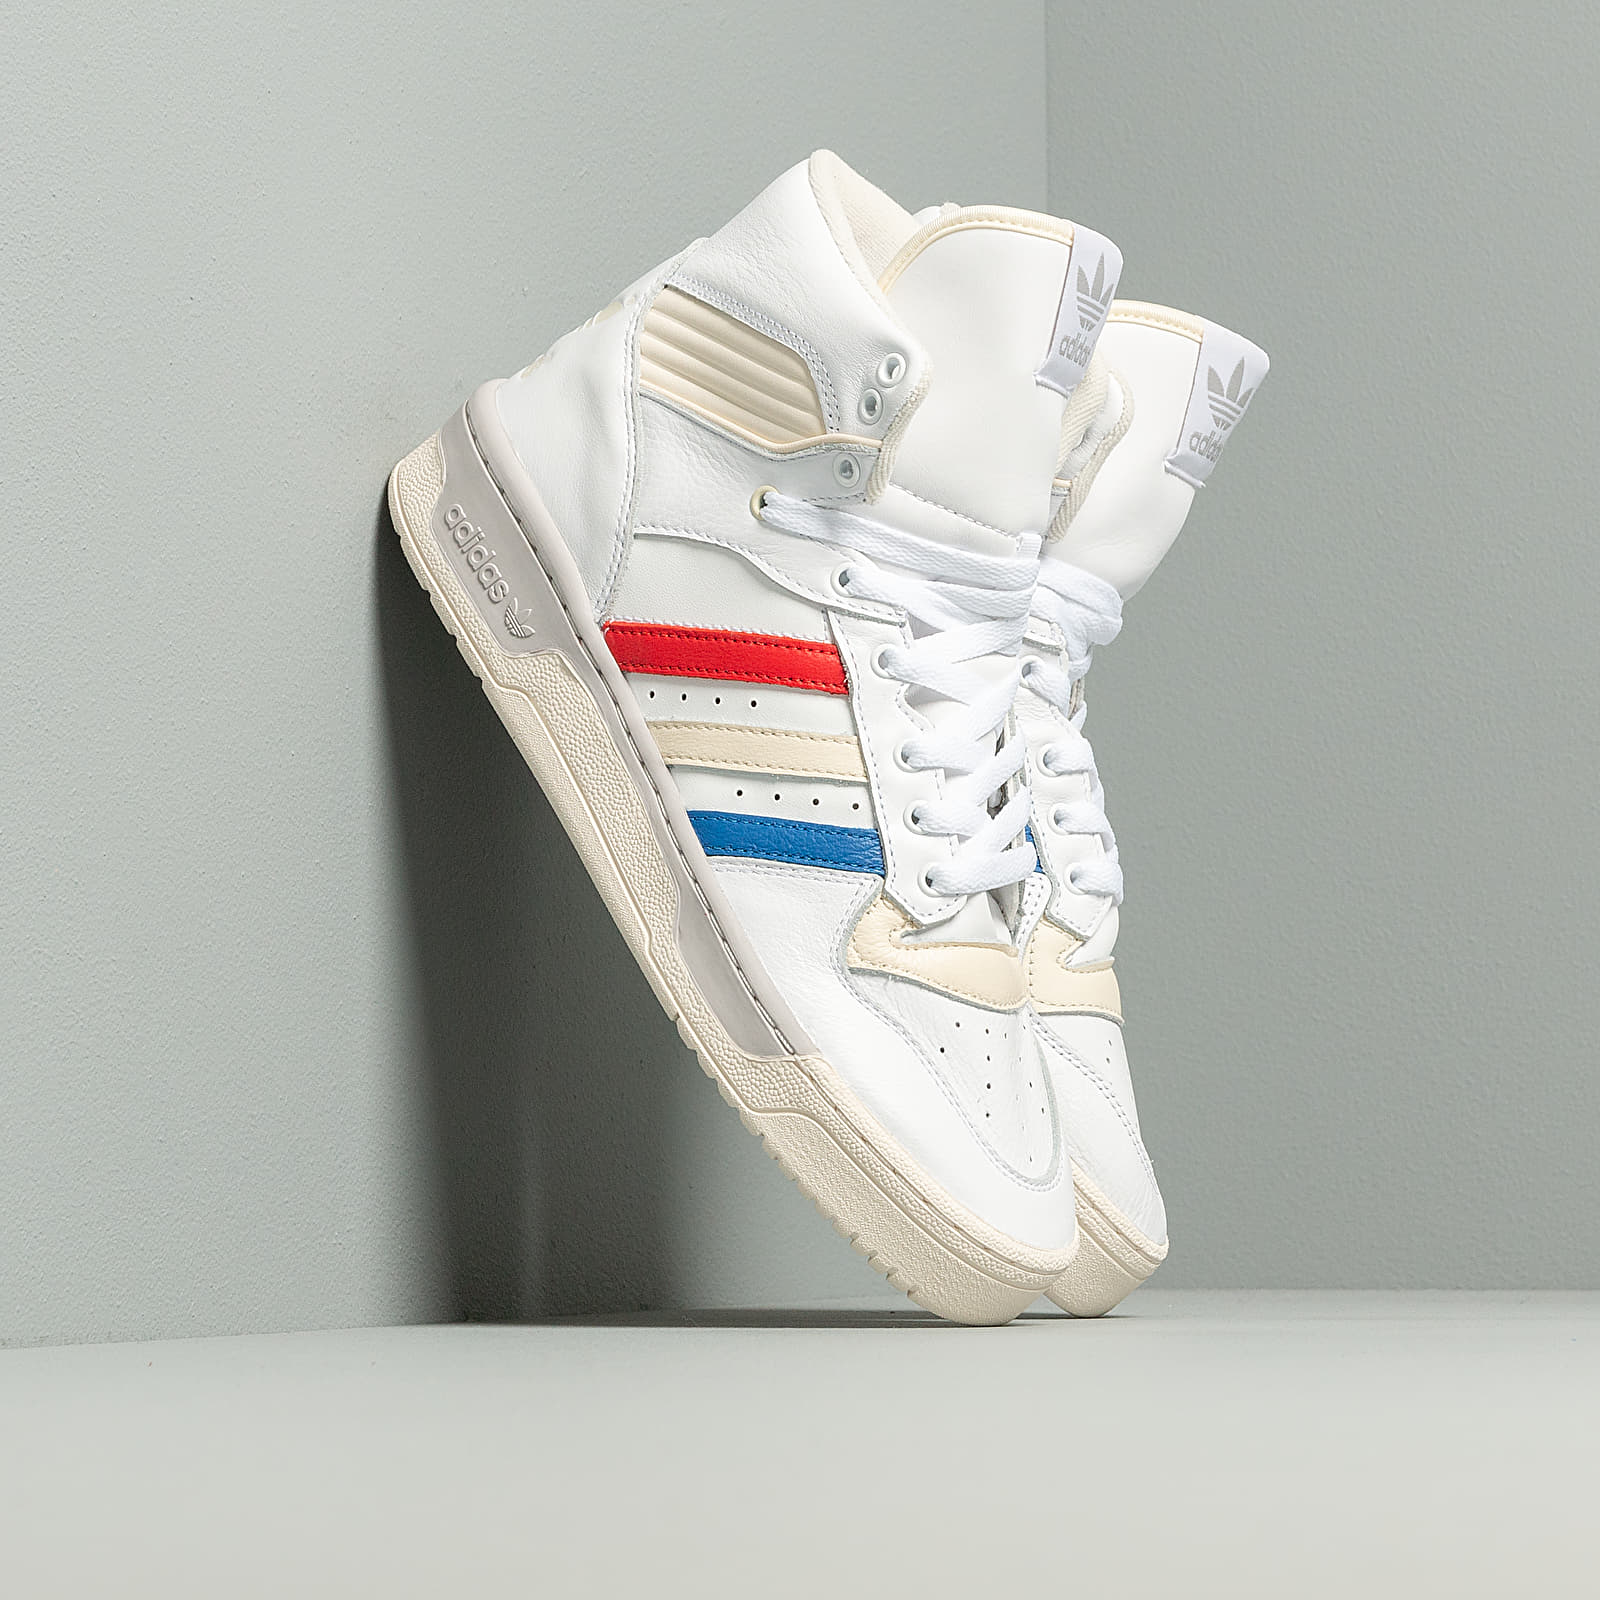 Chaussures et baskets homme adidas Rivalry Ftw White/ Core White/ Core White